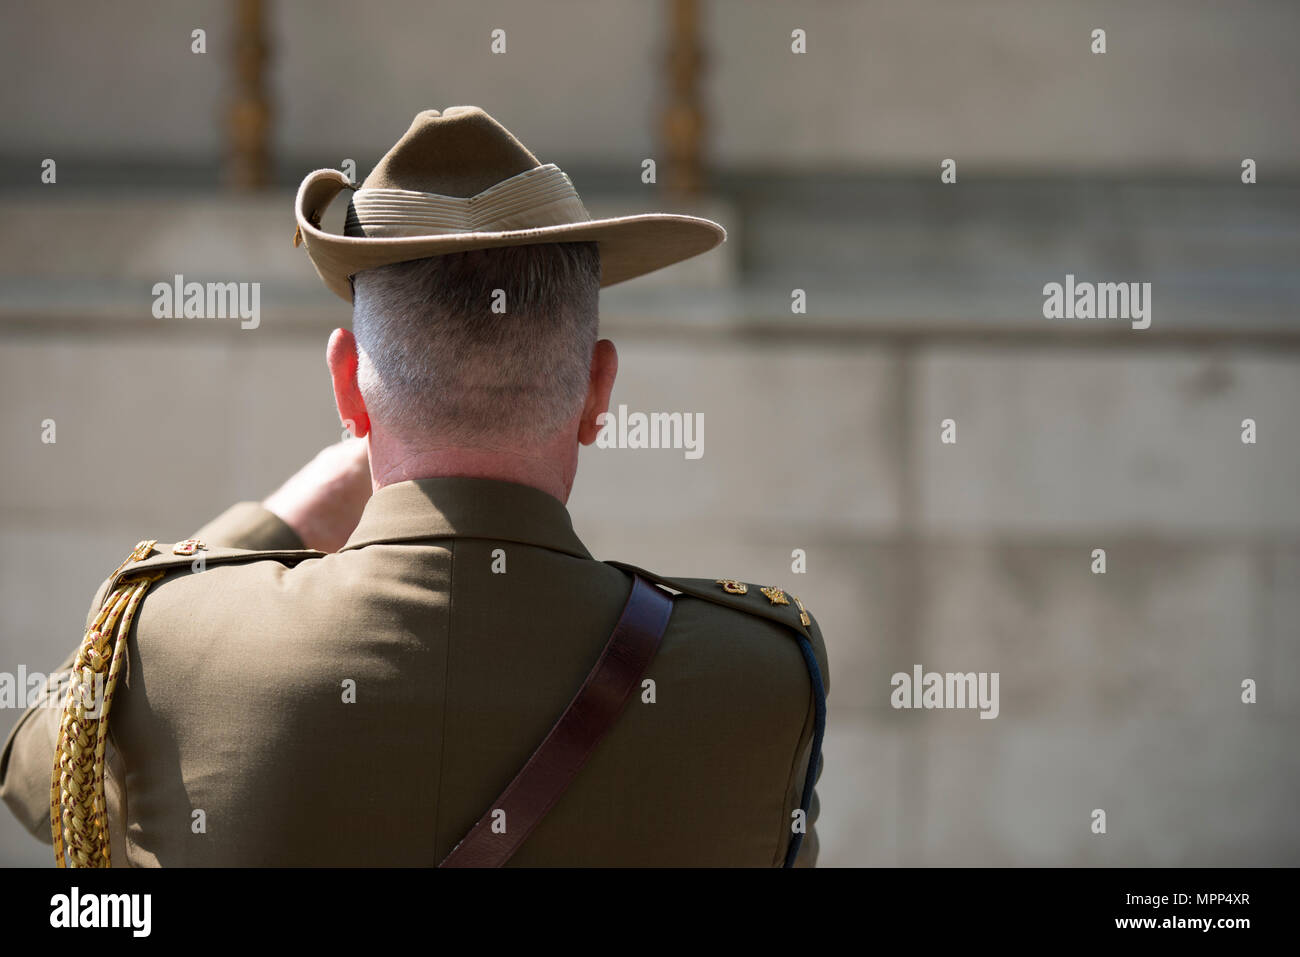 The Cenotaph, Whitehall, London, UK. 23 May, 2018. International Day of UN Peacekeepers Remembrance Ceremony. Australian Chief of Staff in London photographs the Cenotaph after the ceremony is closed. Credit: Malcolm Park/Alamy Stock Photo